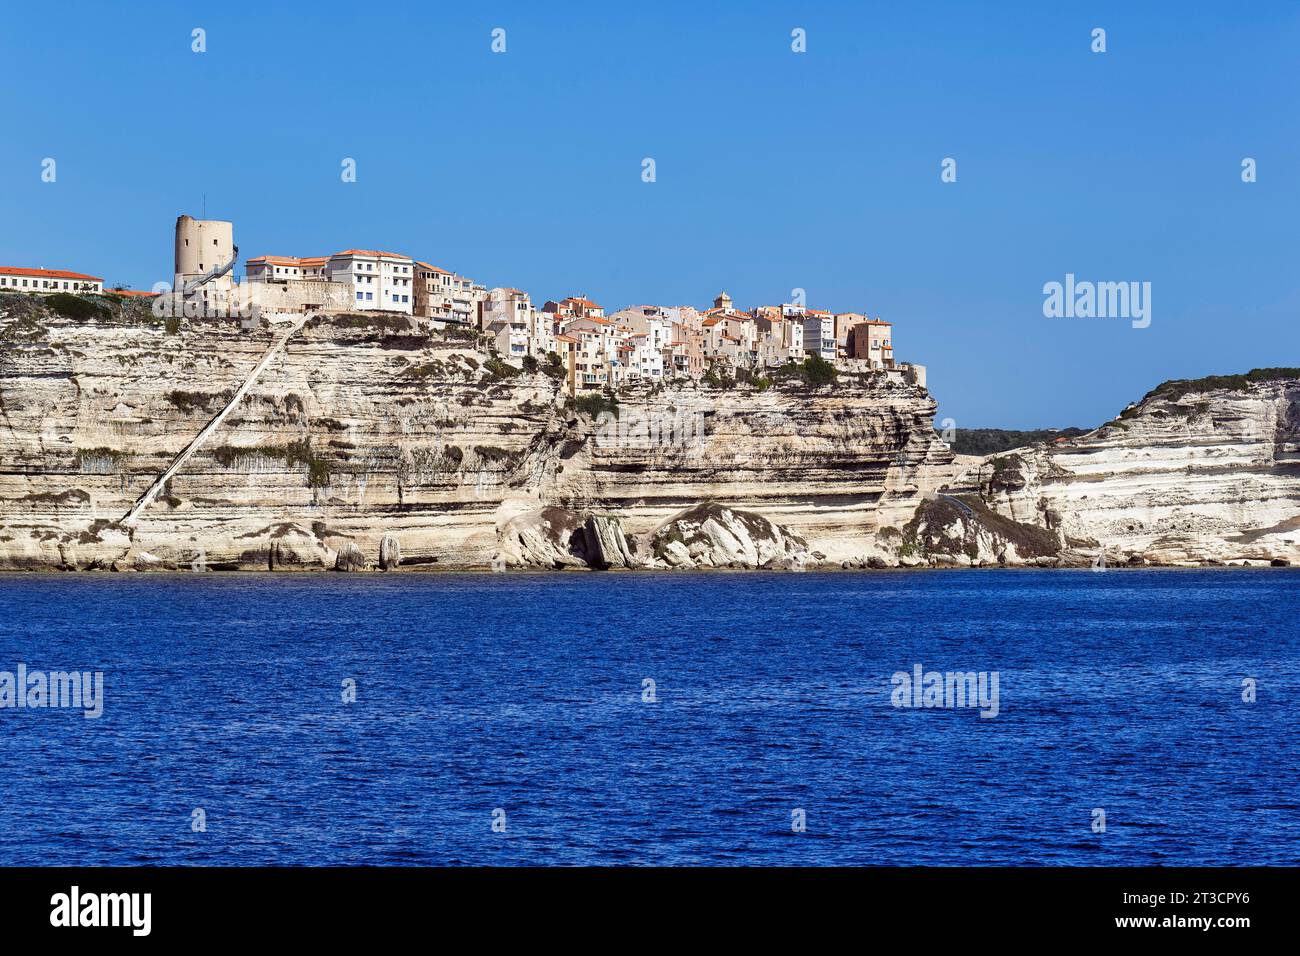 Upper town with the staircase of the King of Aragon on white chalk cliffs, southern tip of Corsica, Bonifacio, Corsica, France Stock Photo